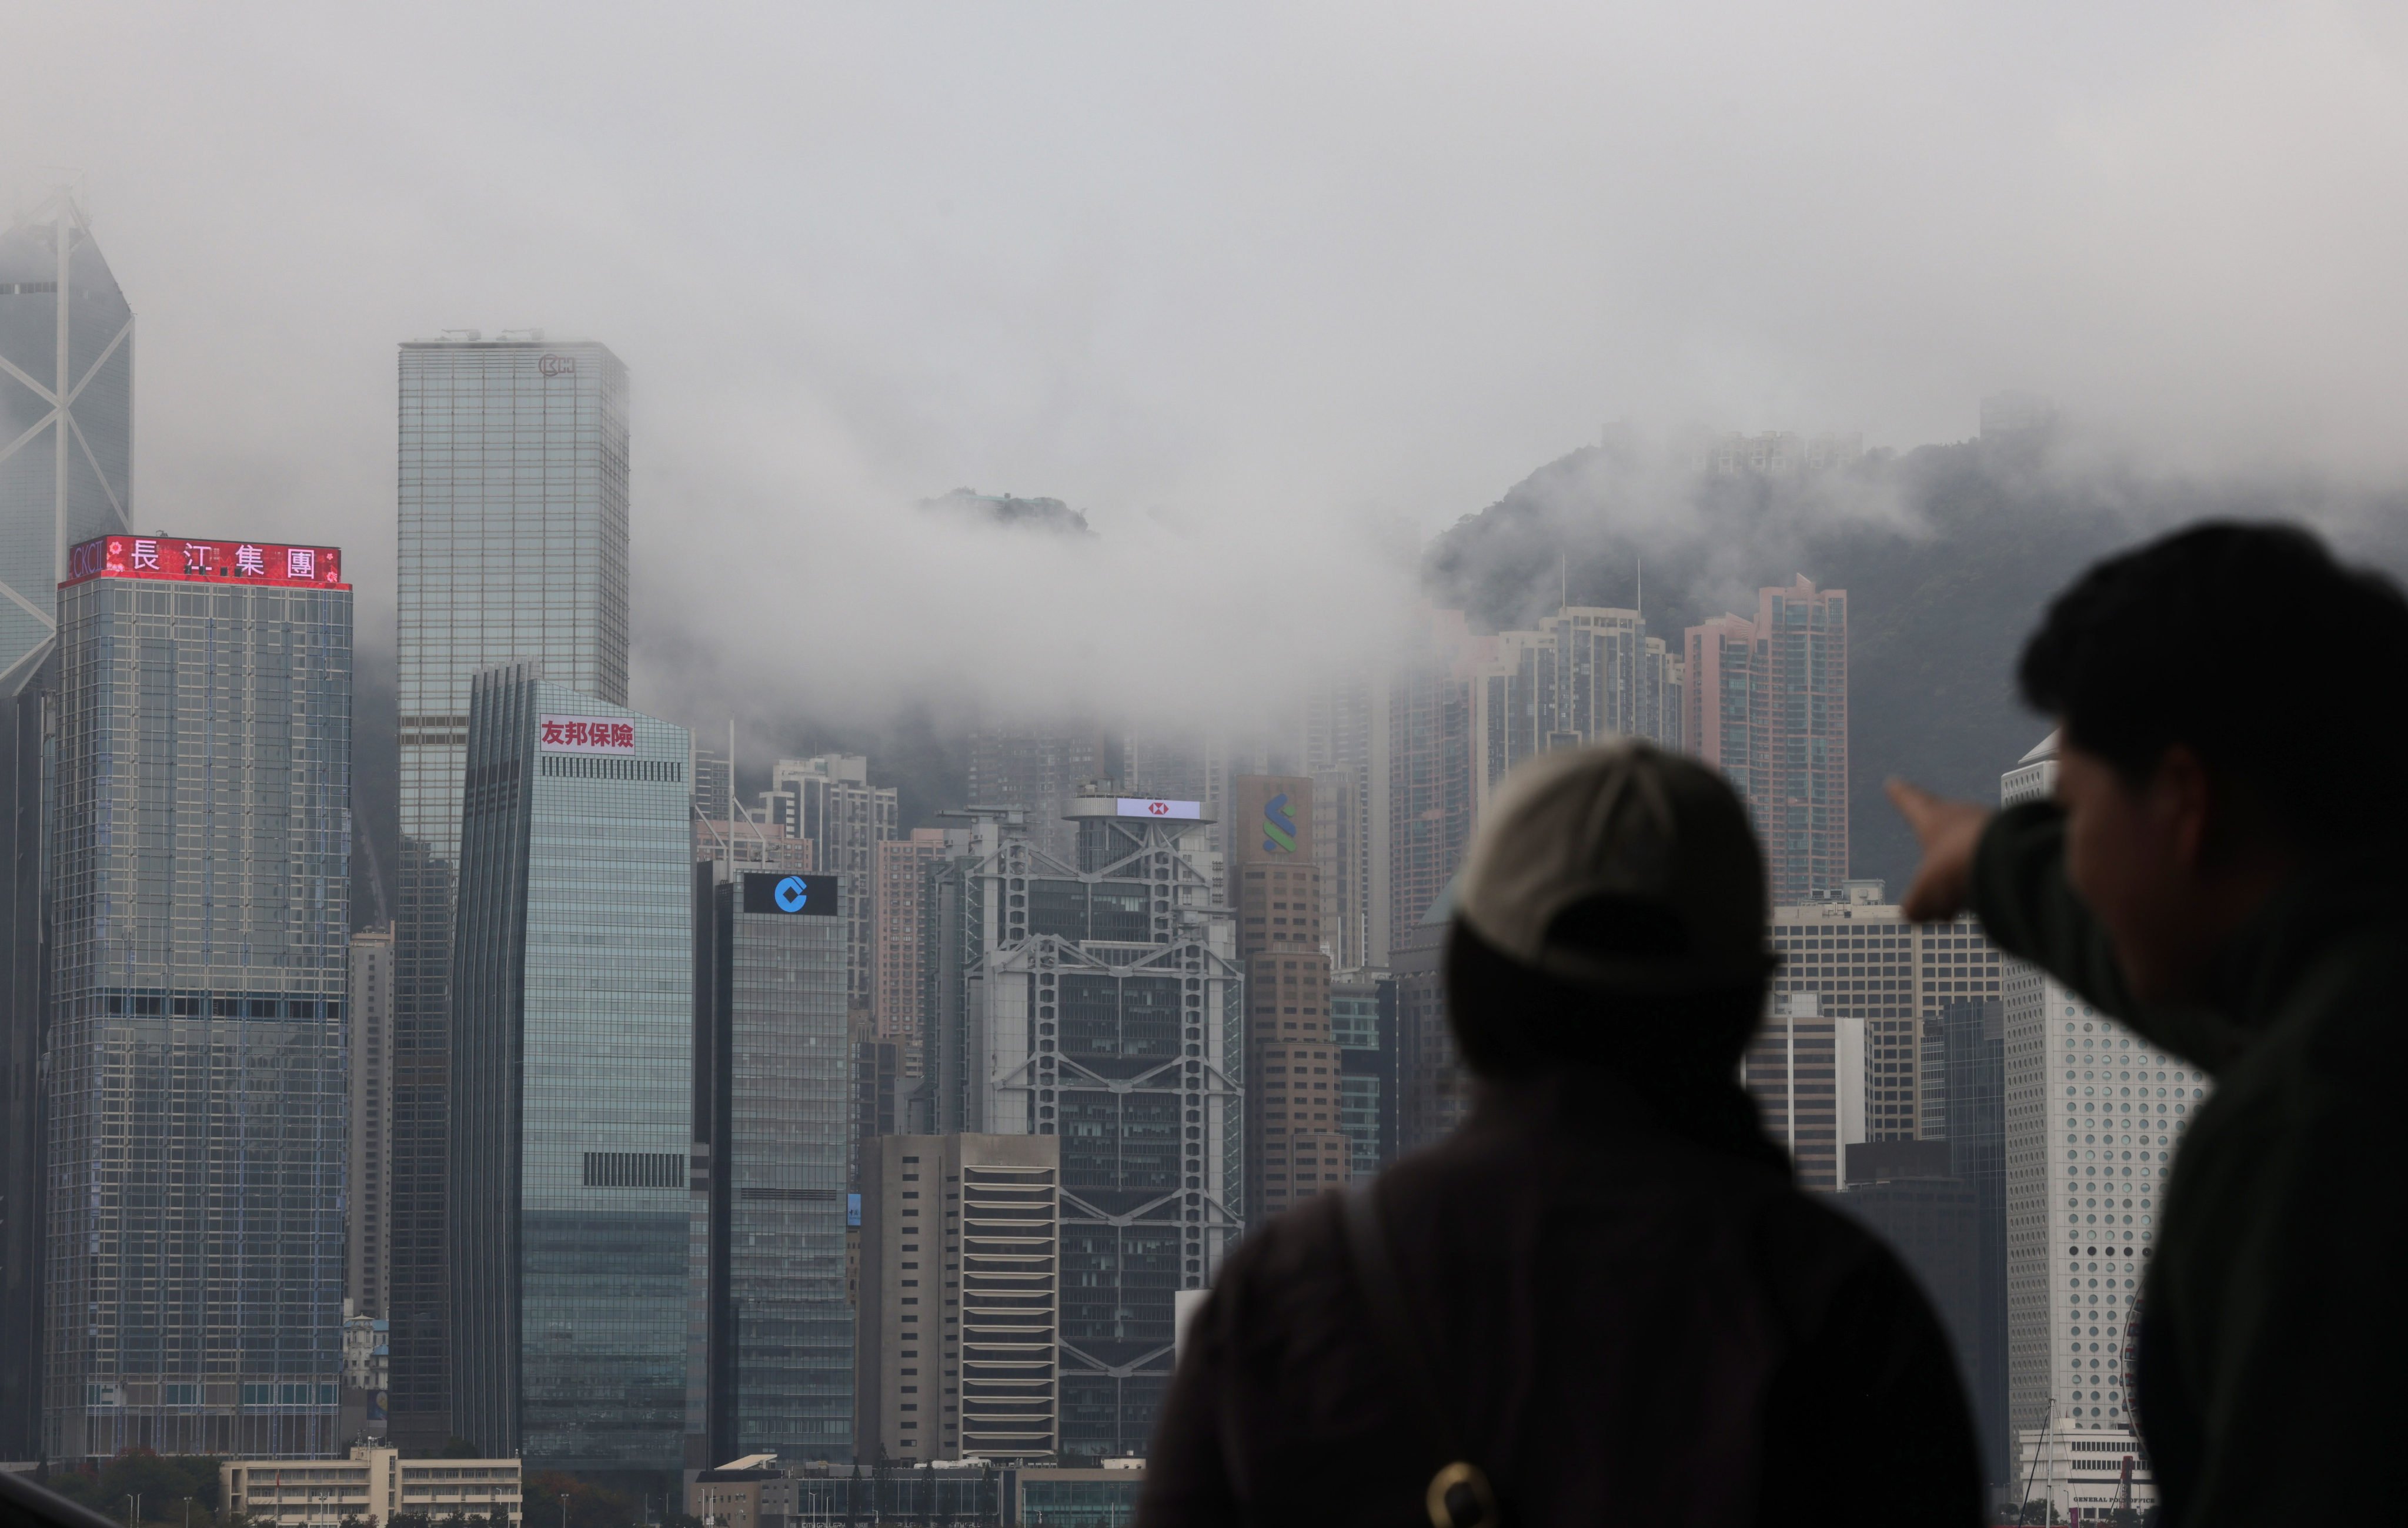 Hong Kong’s Central business district. While YF Life and China Life are Hong Kong’s smallest MPF providers, Manulife and HSBC are the two largest. Photo: Jelly Tse